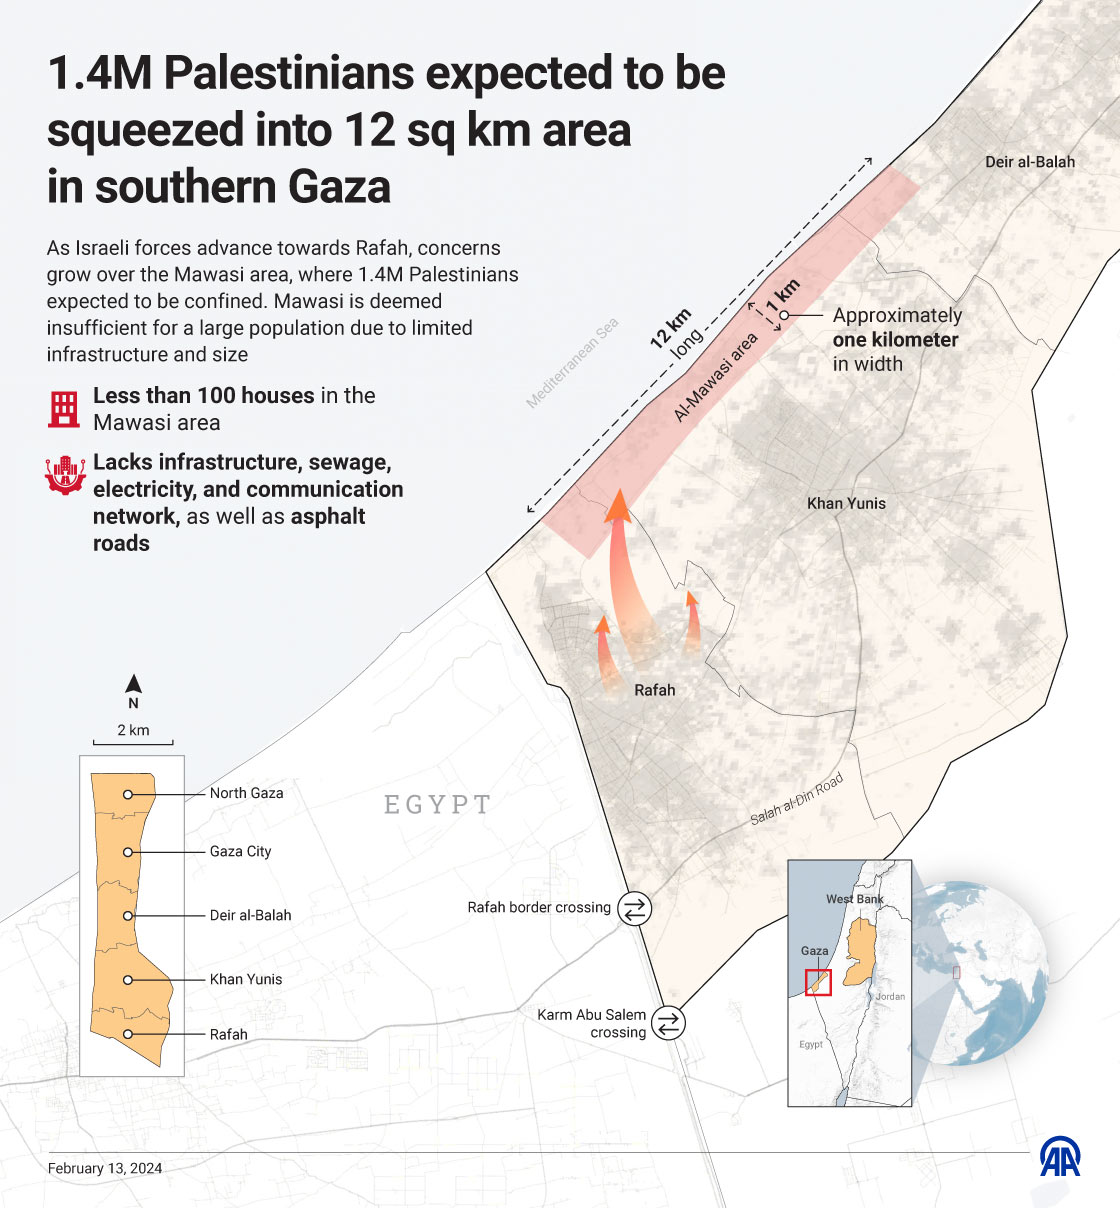 1.4M Palestinians expected to be squeezed into 12 sq km area in southern Gaza